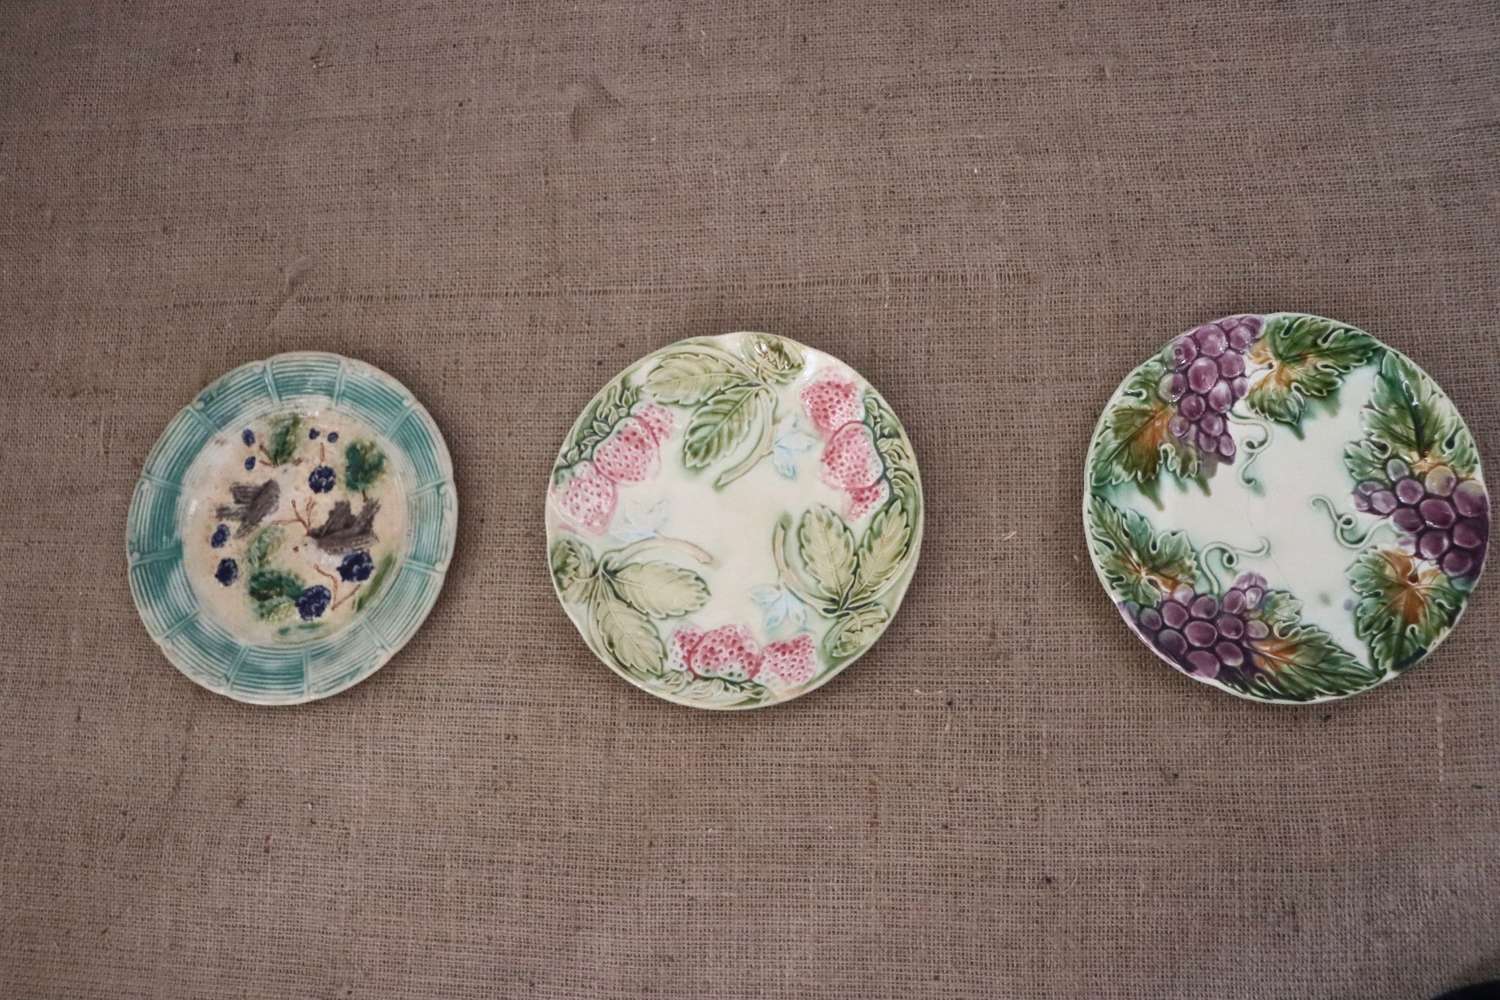 19th century French plates